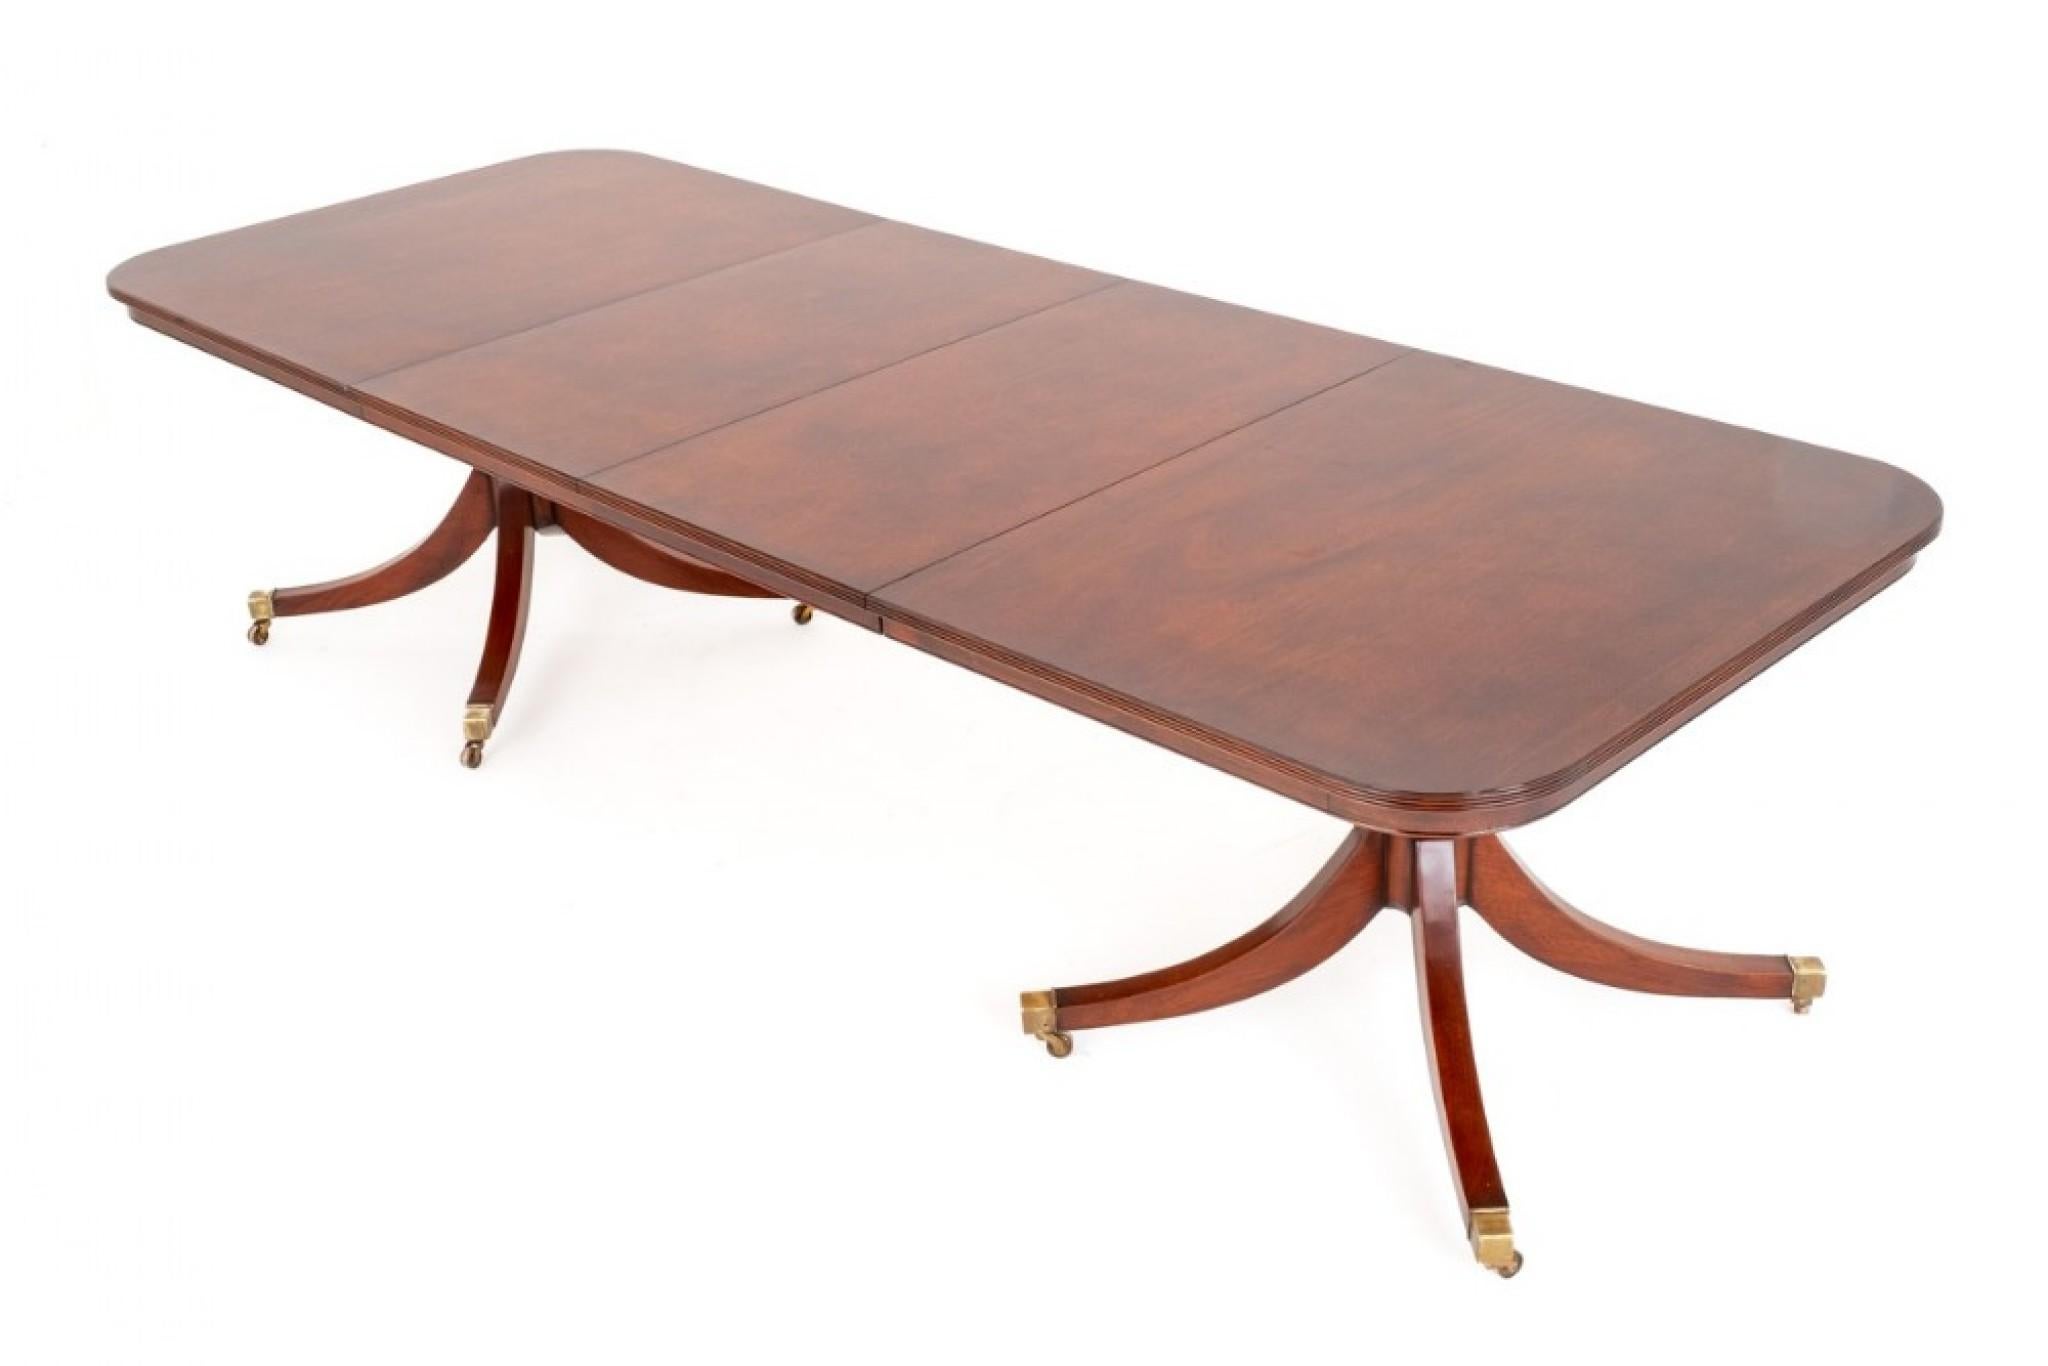 Mahogany Regency Style 2 Leaf Extending Dining Table.
Please scroll through for more pix - this ships anywhere, please get in touch 
This Dining Table Stands Upon Elegant Bases Which Comprises of 4 Reeded Swept Legs With Square Box Brass Castors.